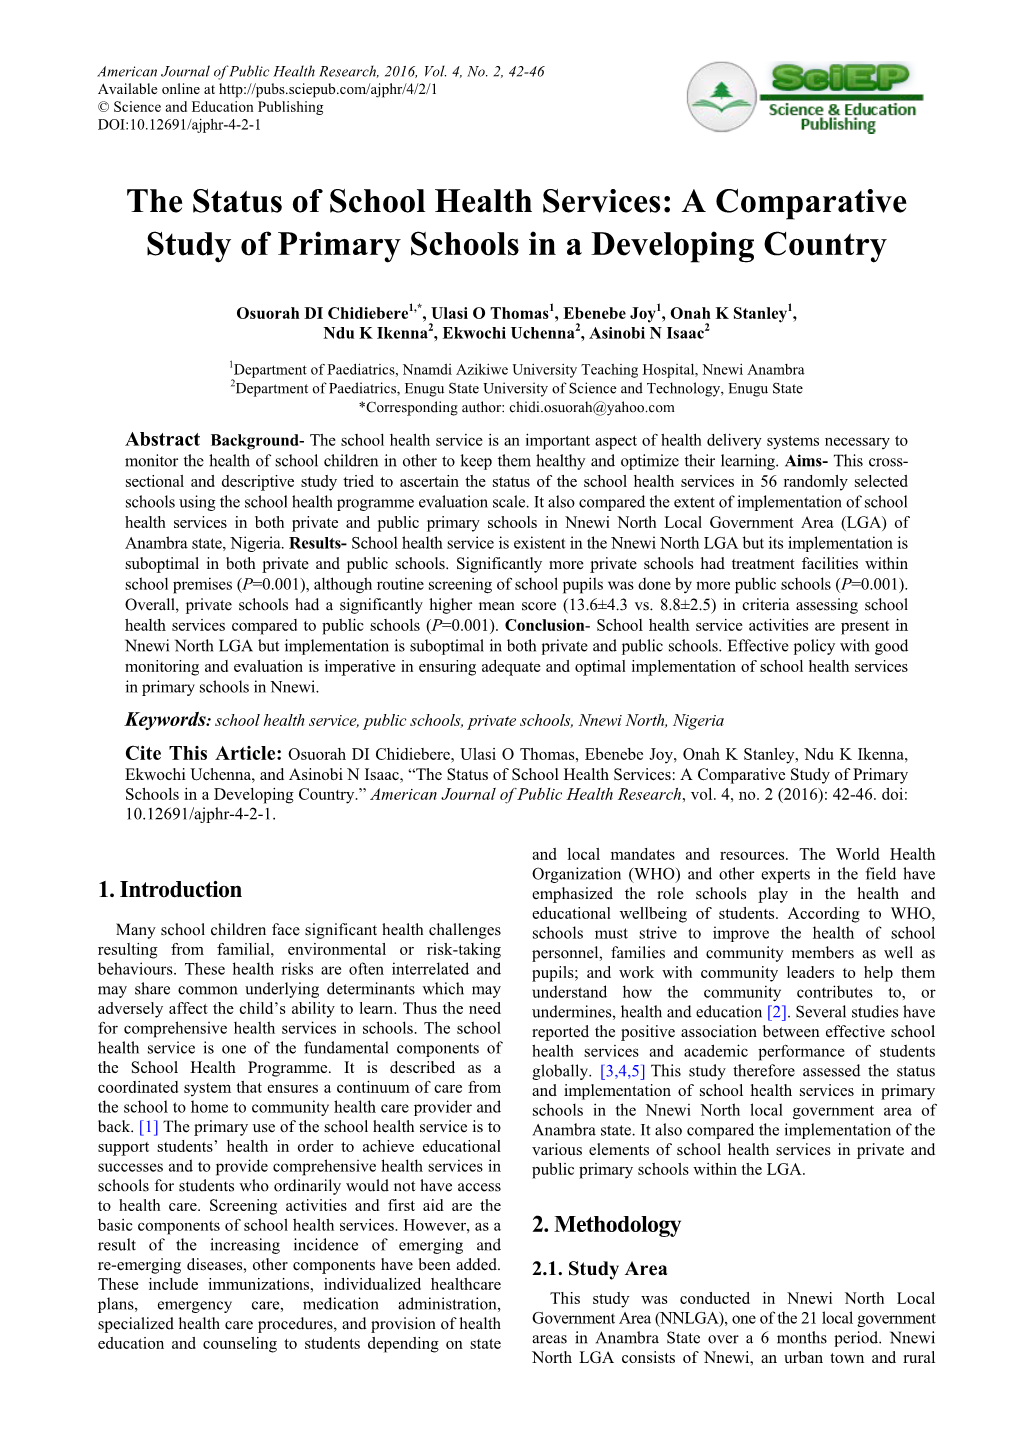 A Comparative Study of Primary Schools in a Developing Country